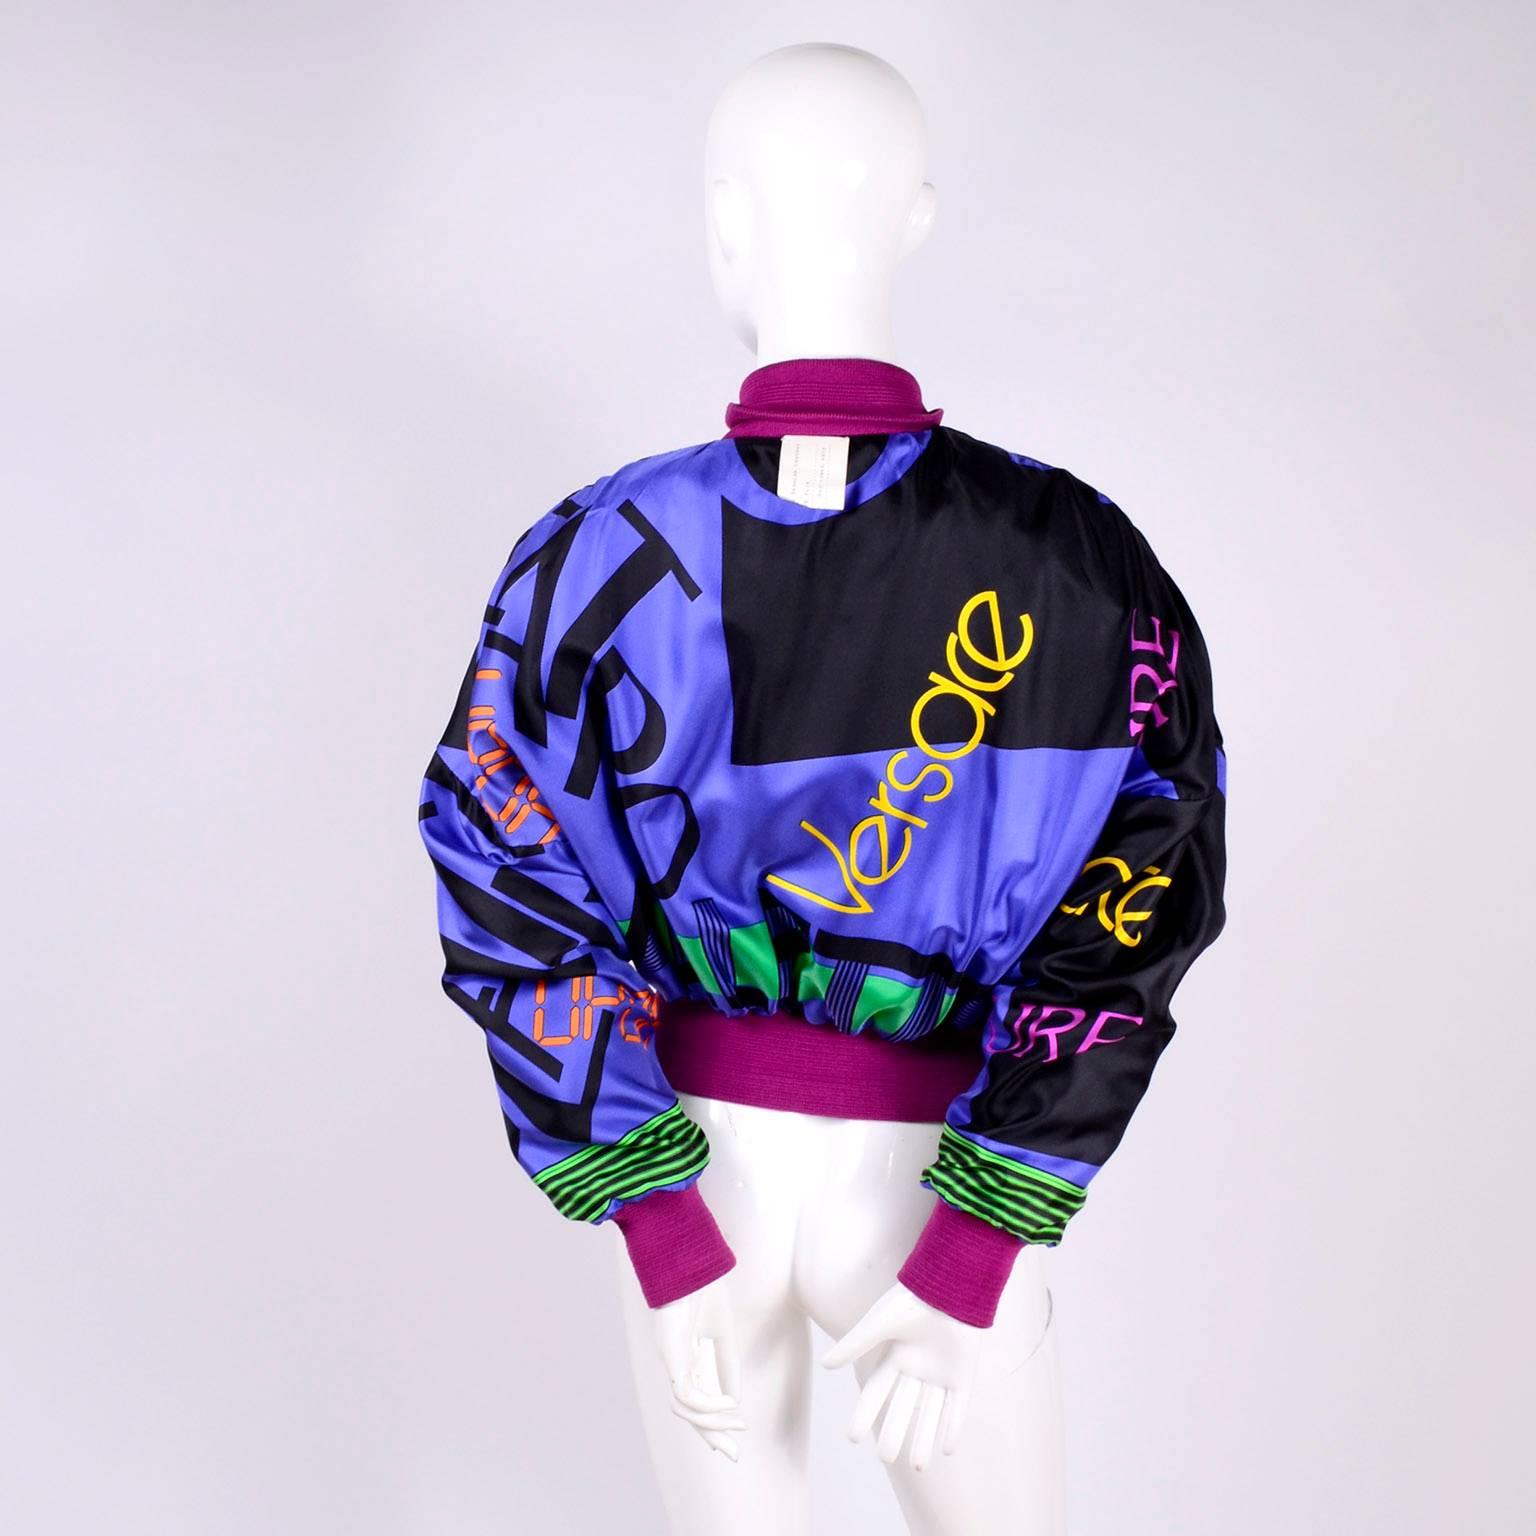 This sensational vintage Versace jacket was designed by Gianni Versace in the 1980's. The jacket is pink suede but the back is a panel of fabric printed with images of very stylish 1980's men. The inside is lined with a patterned silk fabric with